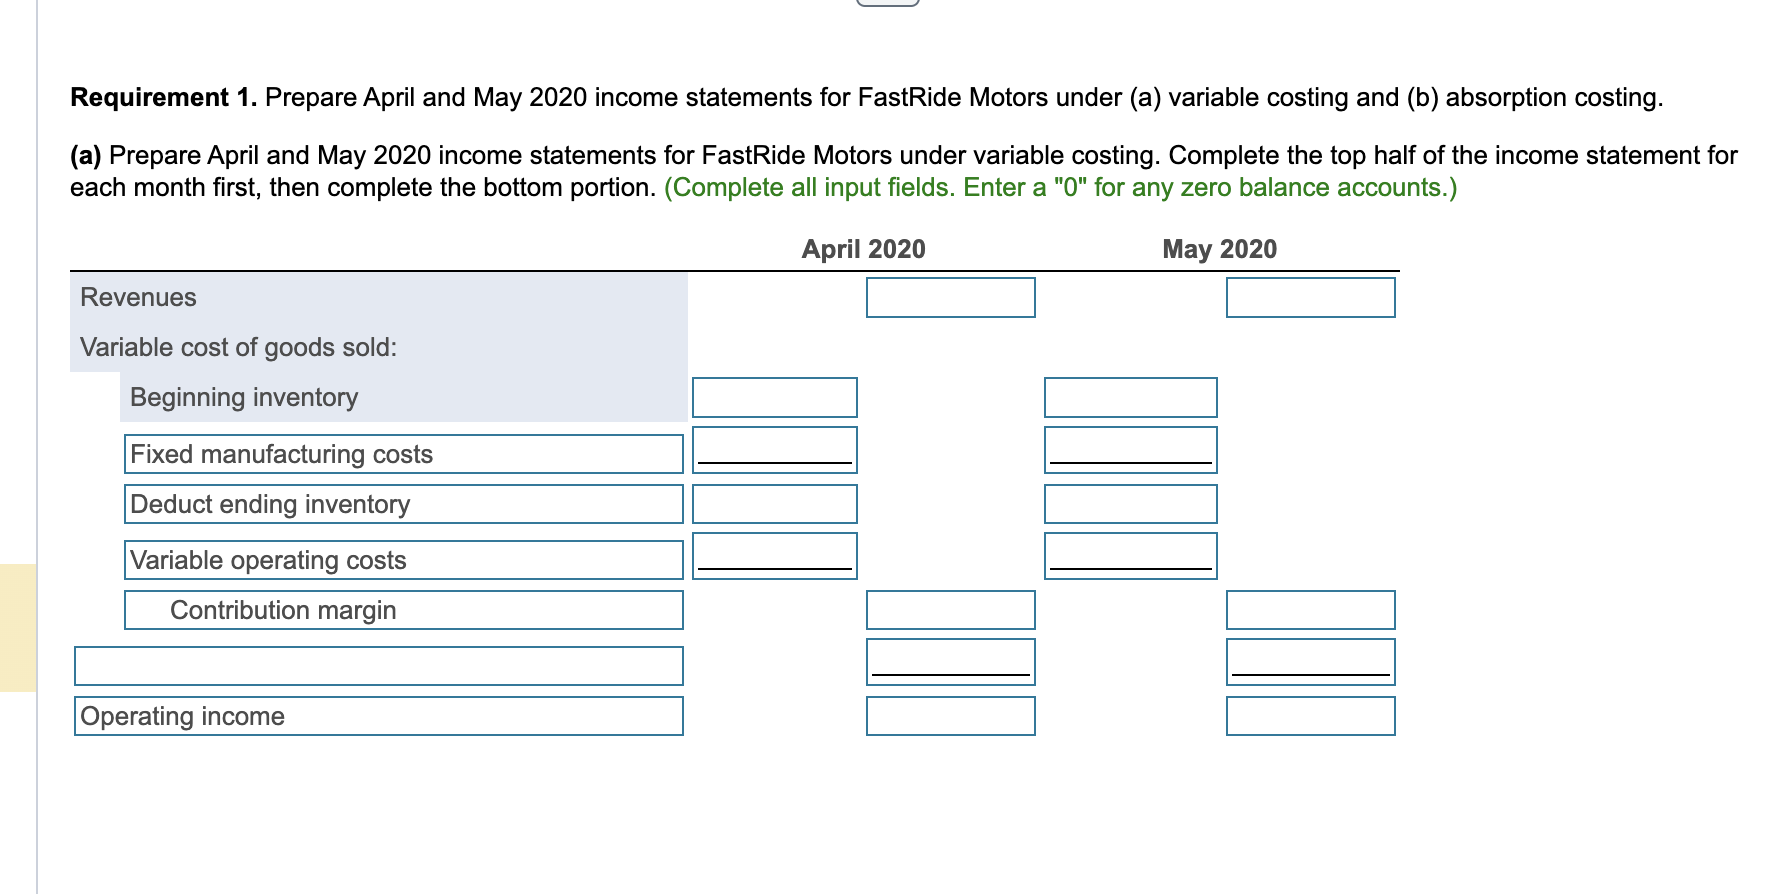 Requirement 1. Prepare April and May 2020 income statements for FastRide Motors under (a) variable costing